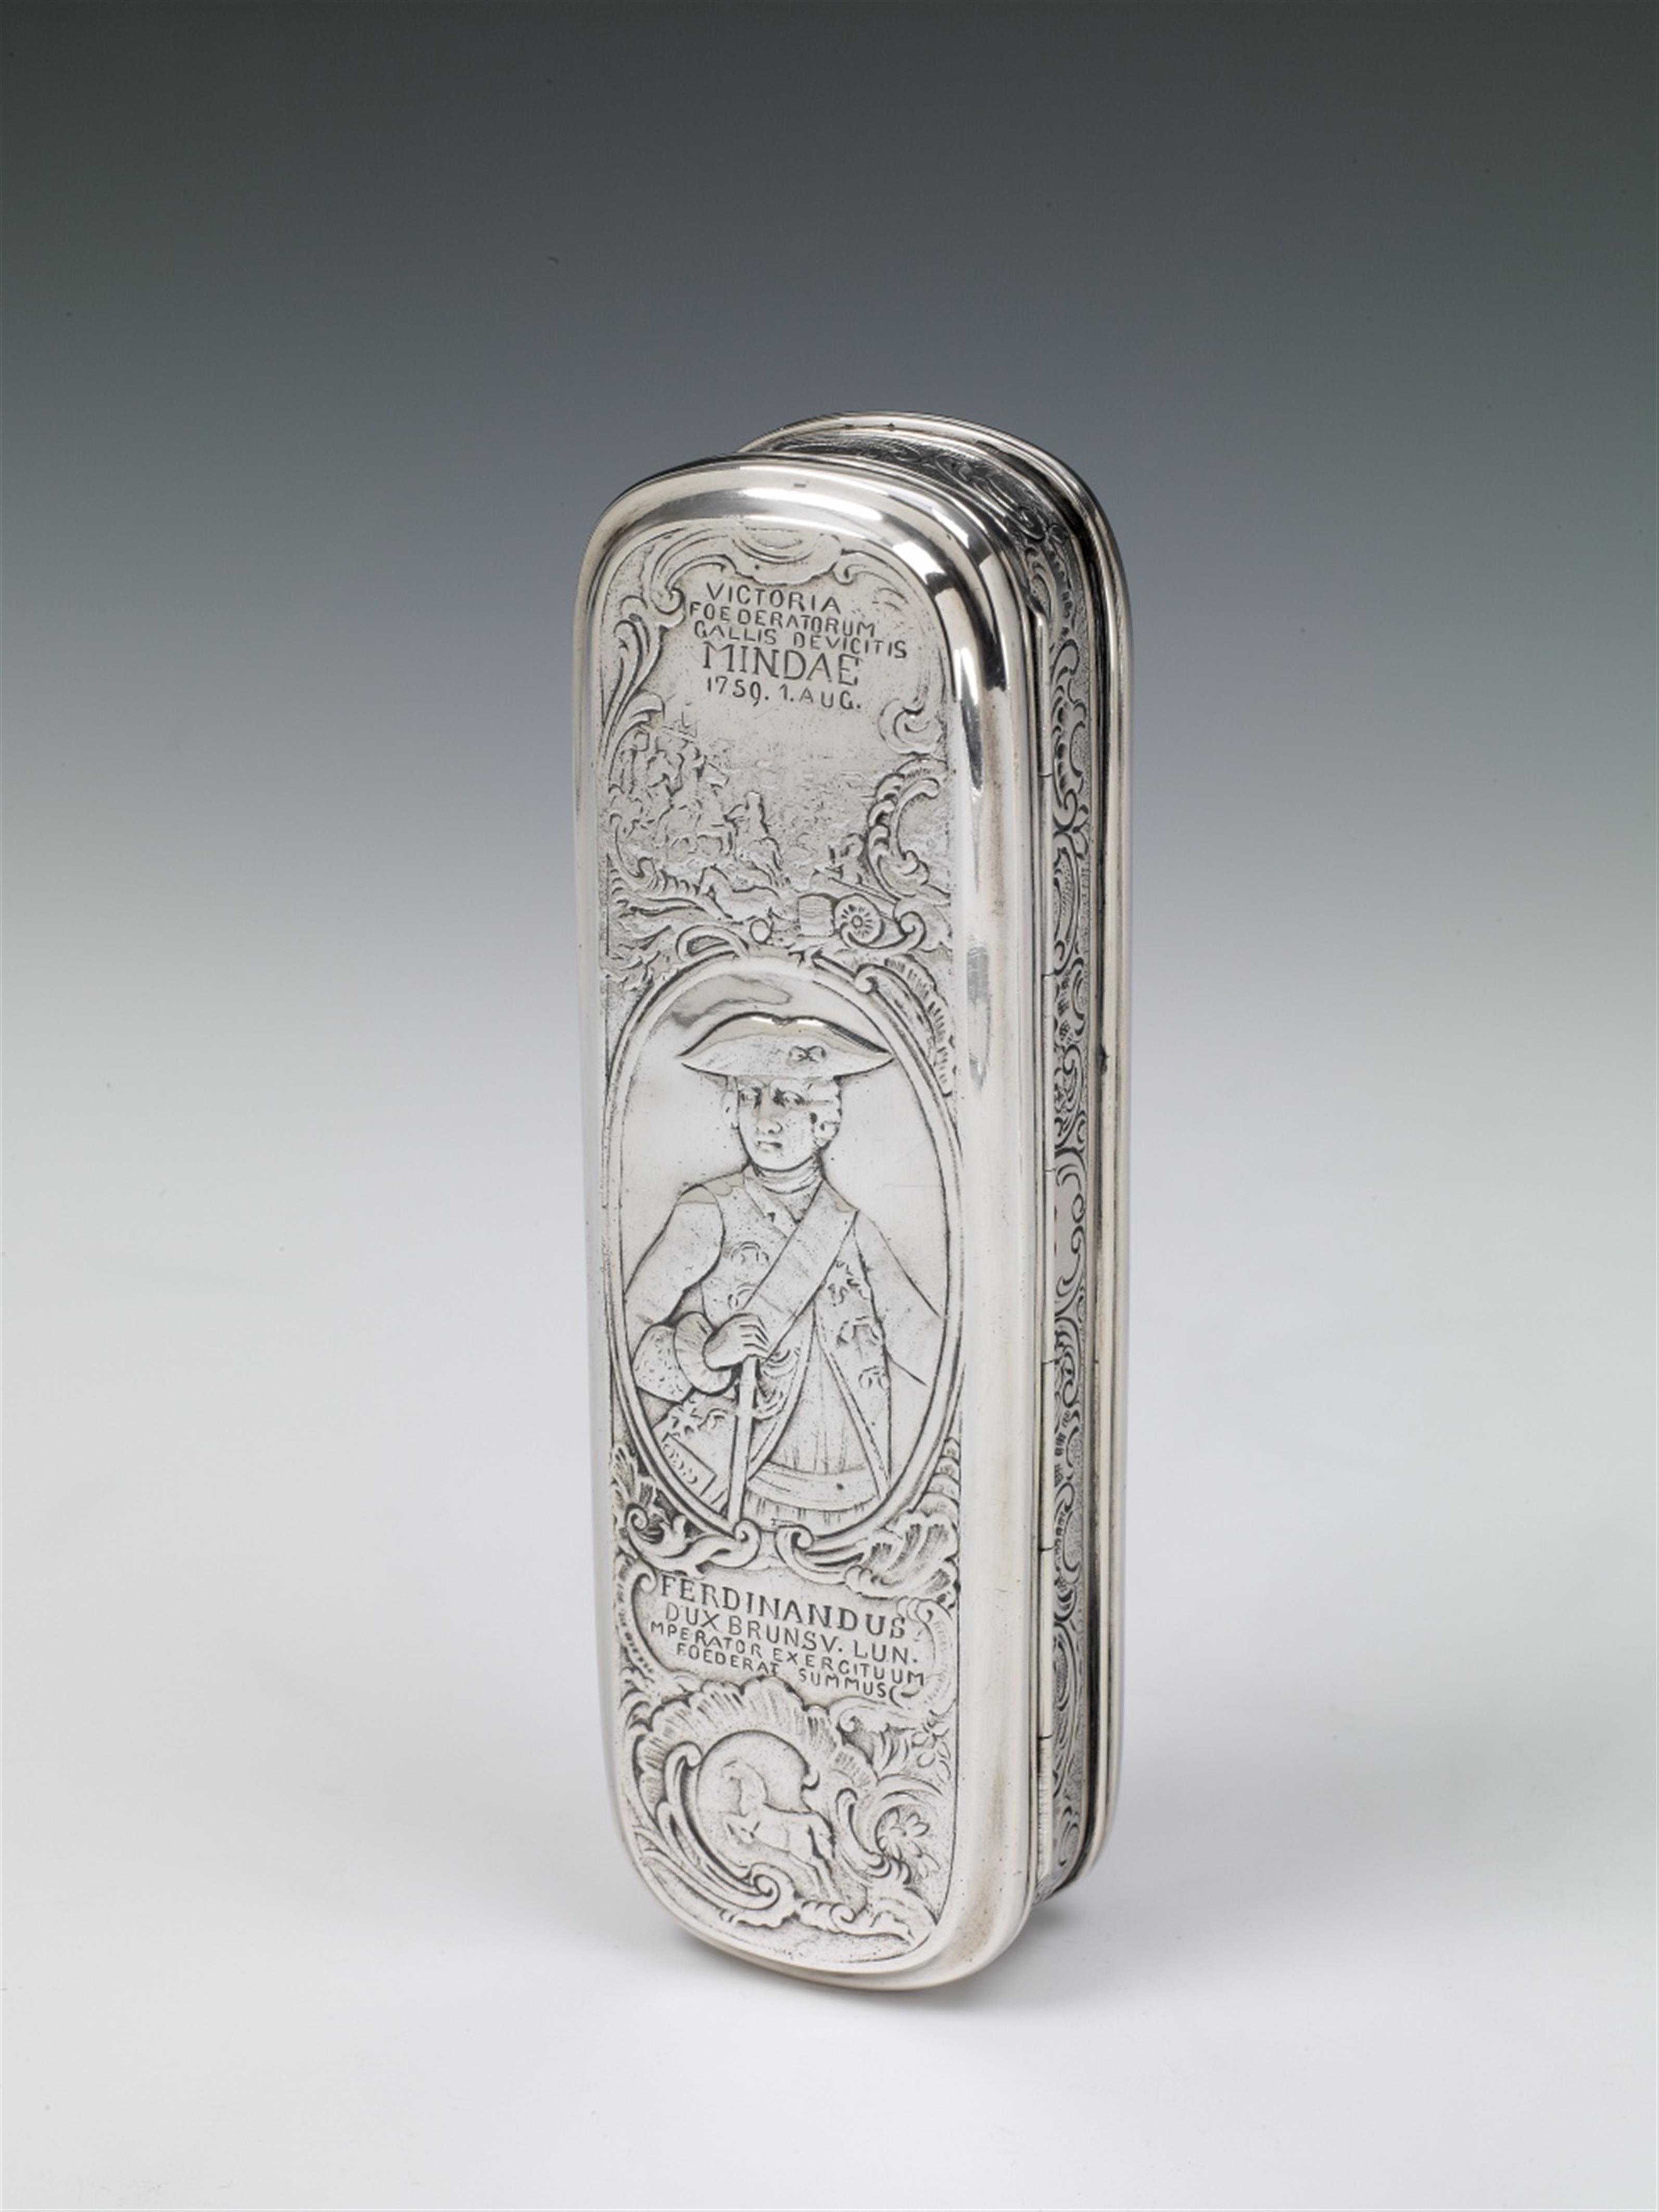 A Potsdam silver snuff box commemorating the Battle of Minden in 1759. With a depiction of the battle and a portrait of Duke Ferdinand von Braunschweig to the front and a portrait of Frederick I and a military camp to the reverse. With Potsdam assay mark. - image-1